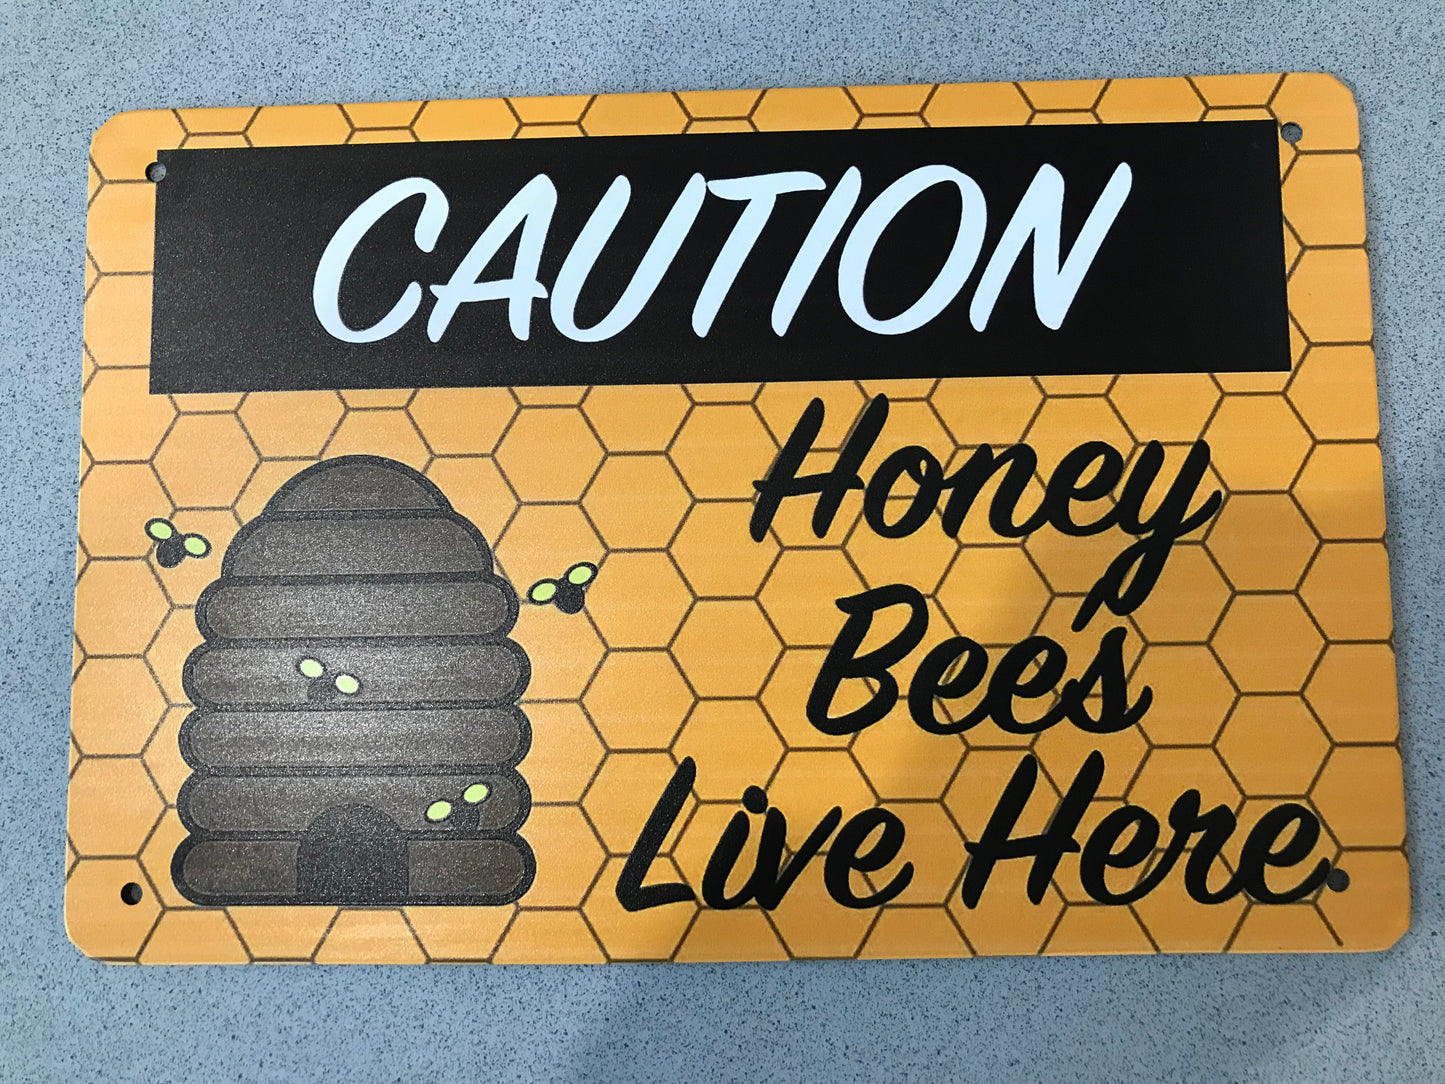 Caution Honey Bees Live Here